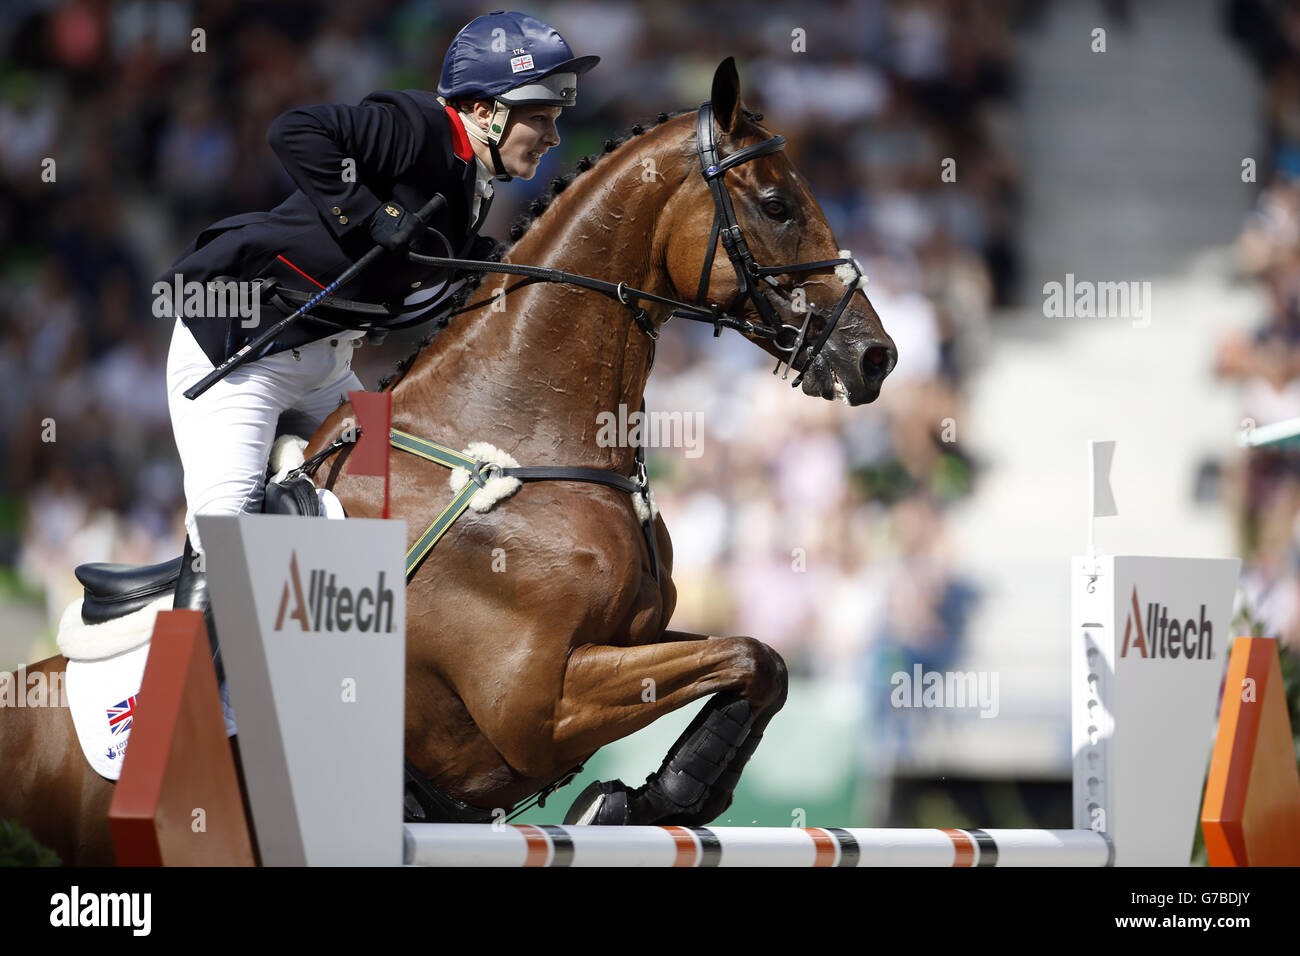 Great Britain's Zara Phillips riding High Kingdom competes in the final phase oif the Eventing competition during day eight of the Alltech FEI World Equestrian Games at Stade D'Ornano, Normandie, France. Stock Photo